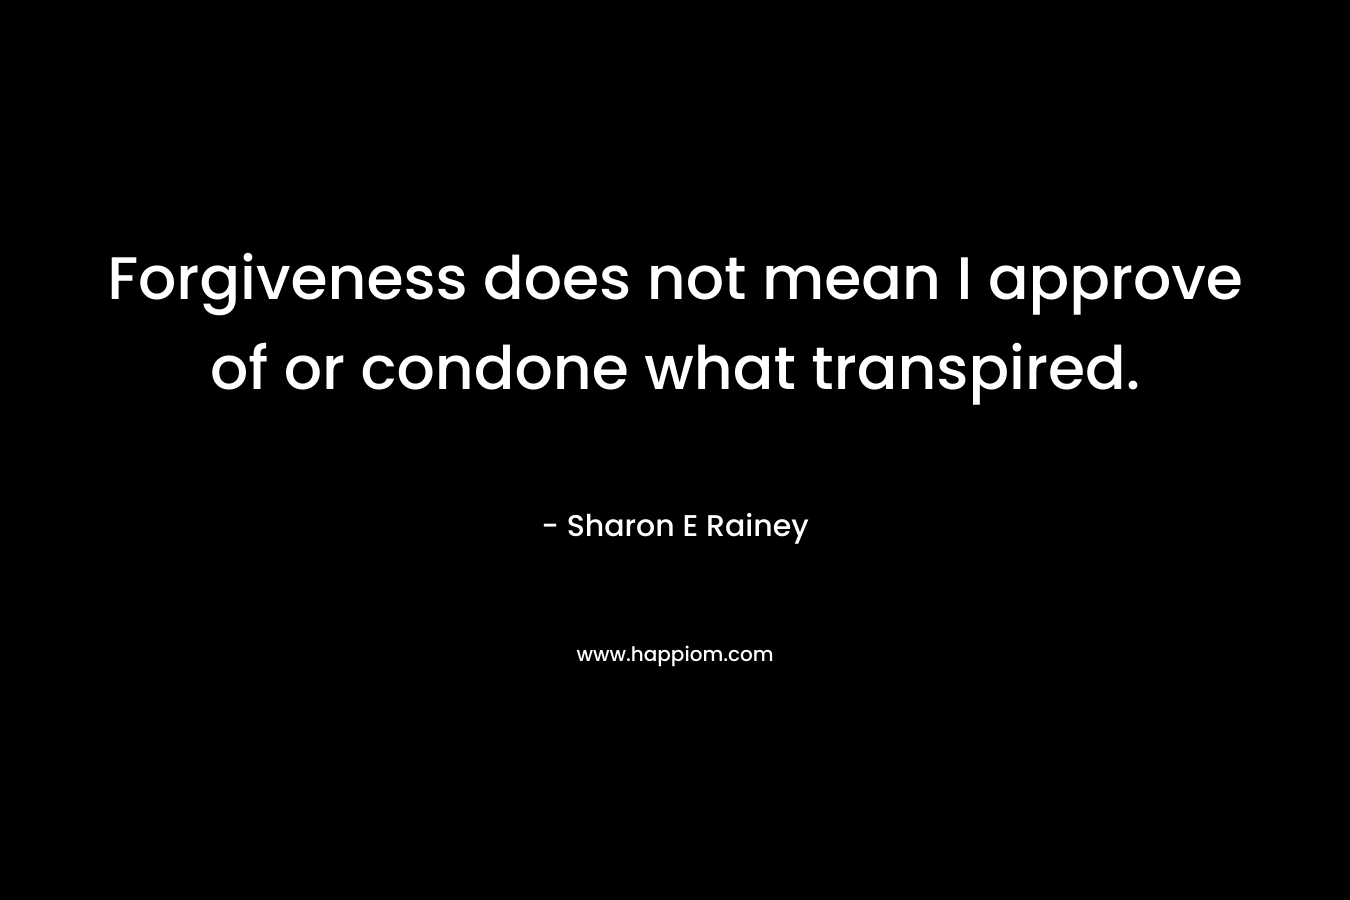 Forgiveness does not mean I approve of or condone what transpired. – Sharon E Rainey